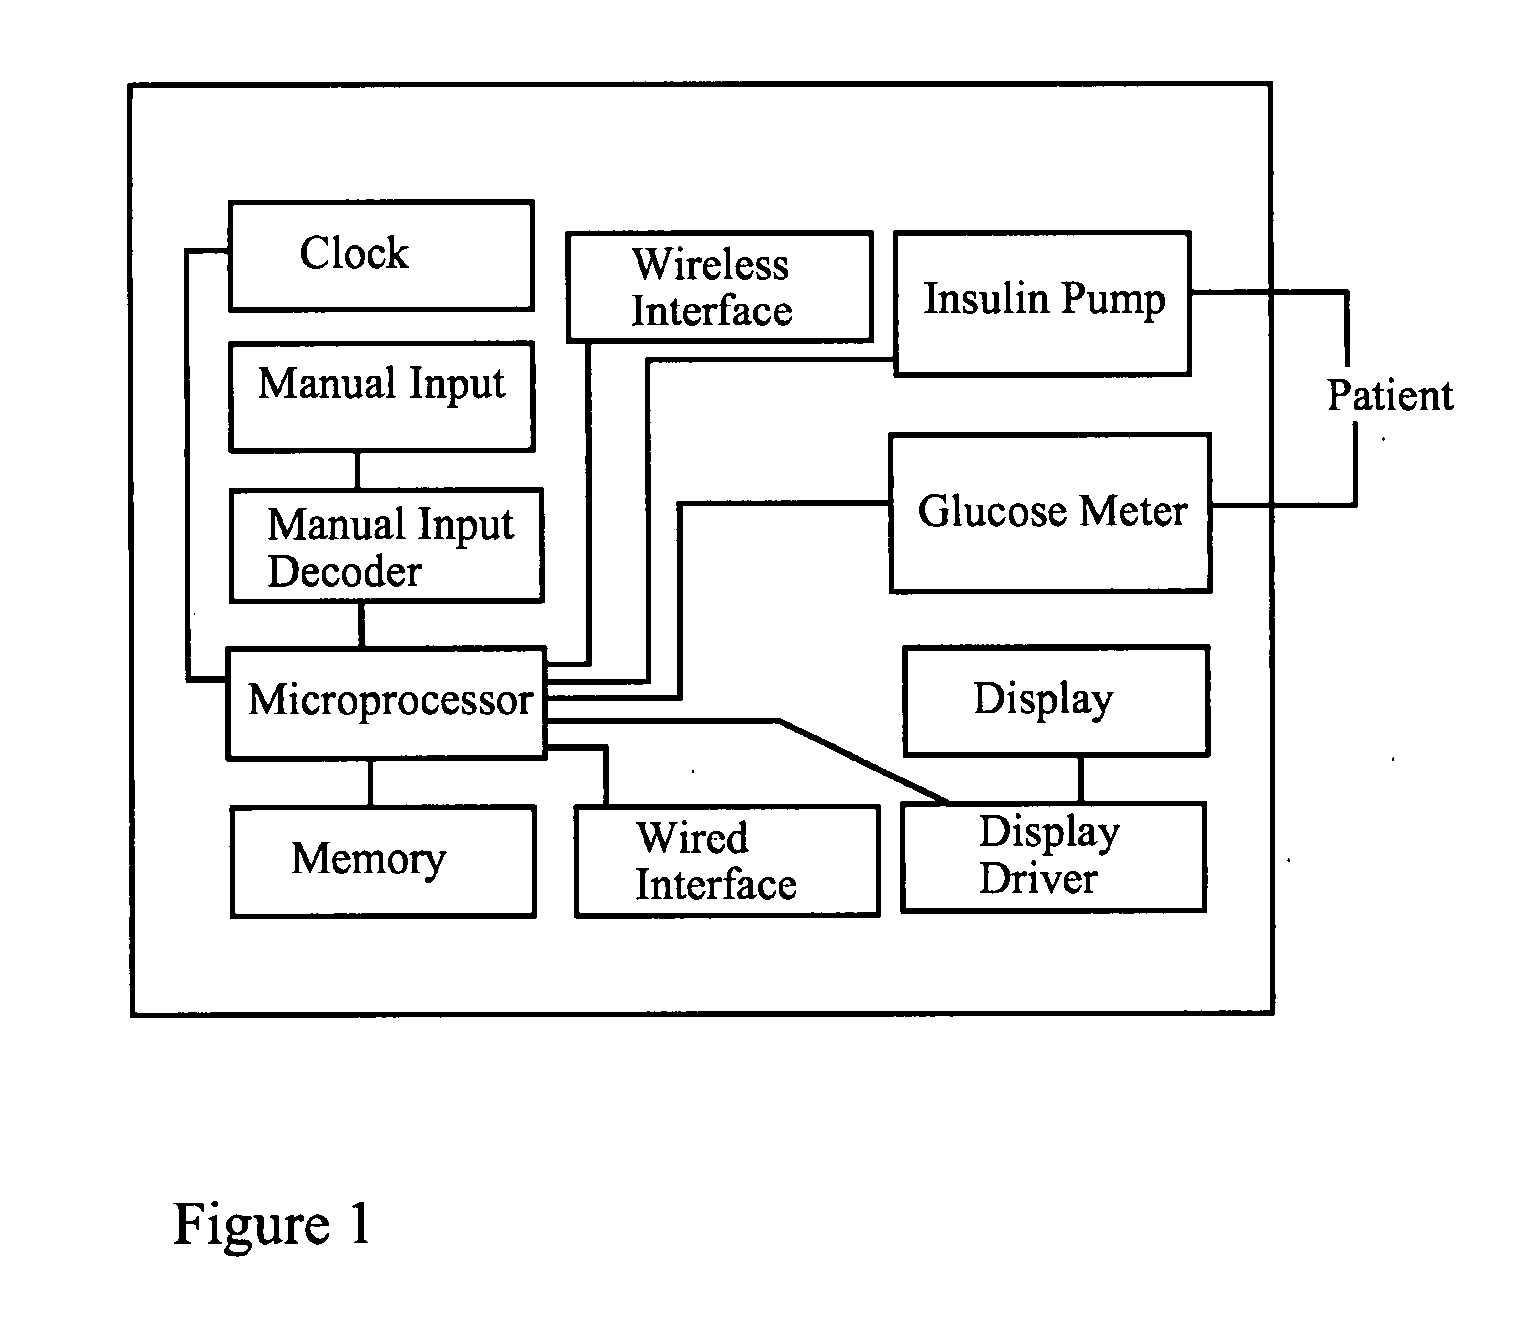 Device for Predicting and Managing Blood Glucose by Analyzing the Effect of, and Controlling, Pharmacodynamic Insulin Equivalents